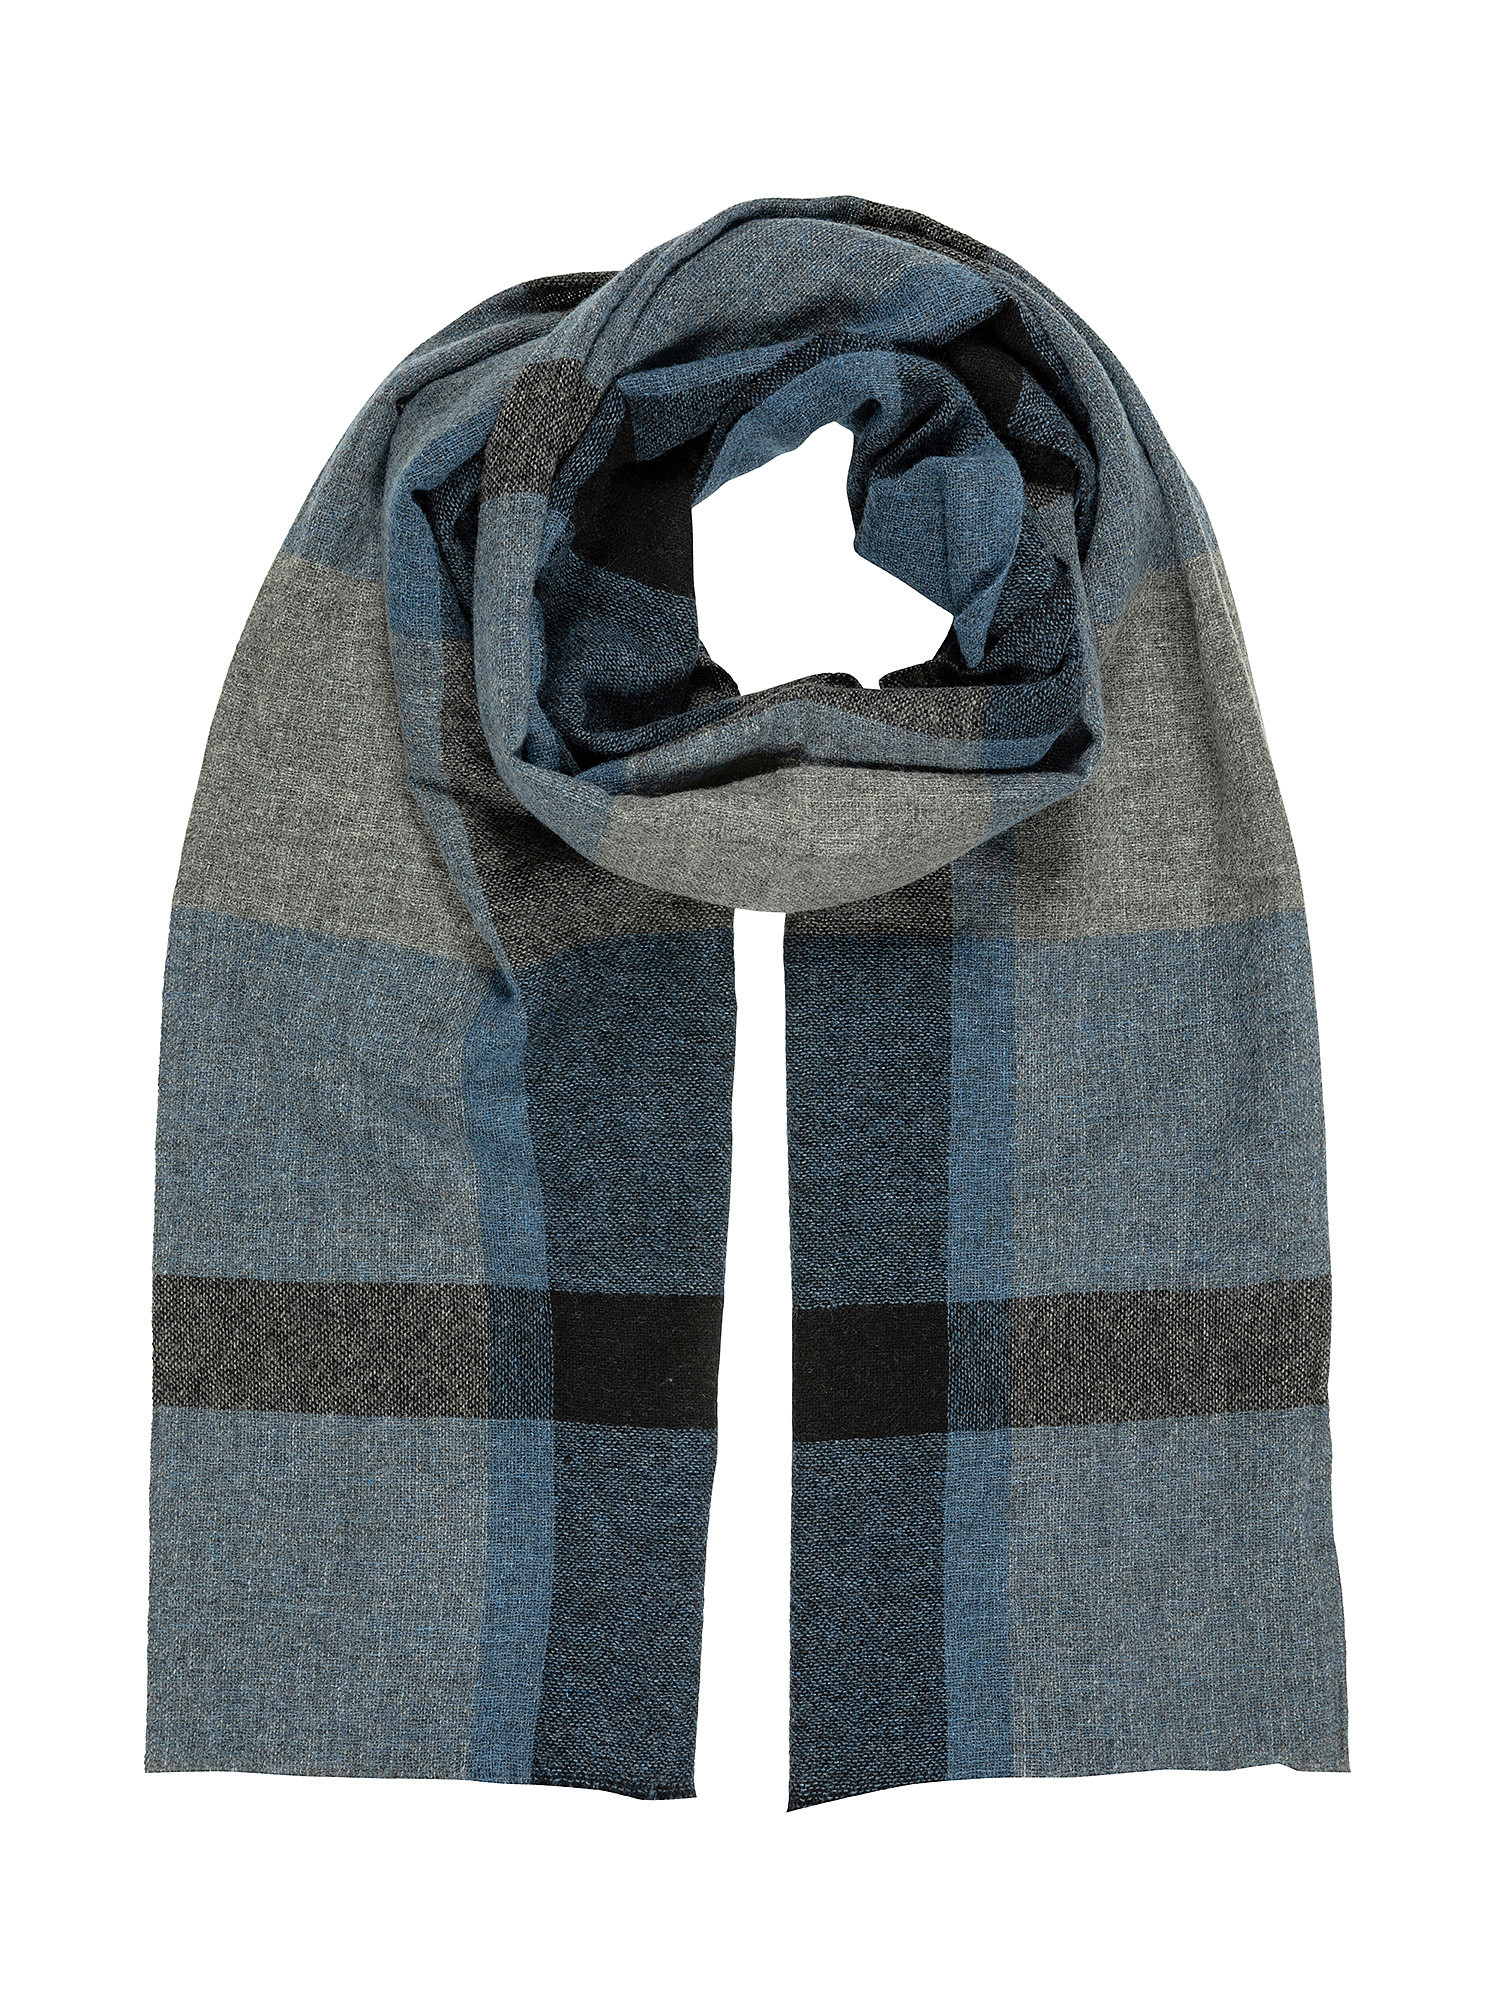 Checked wool blend scarf, Light Blue, large image number 0